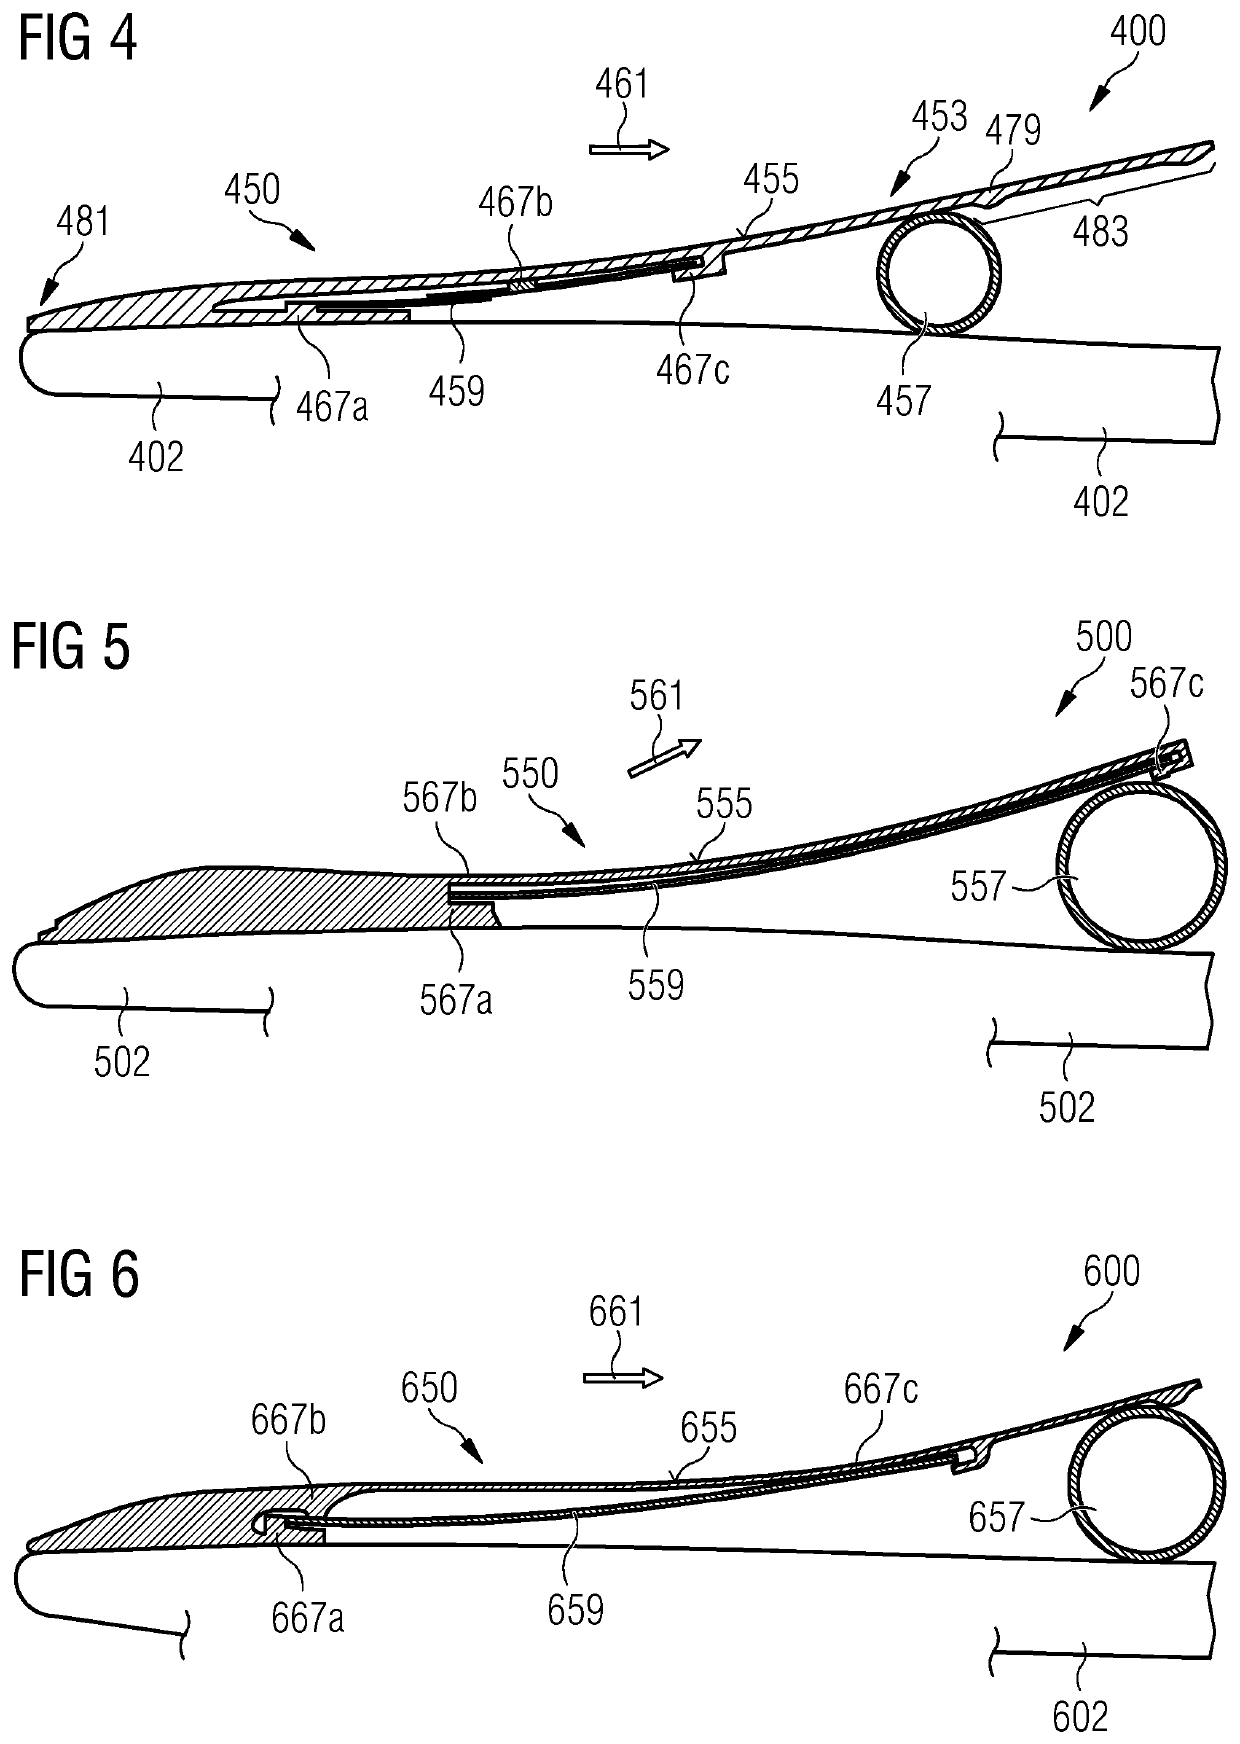 Adaptable spoiler for a wind turbine rotor blade